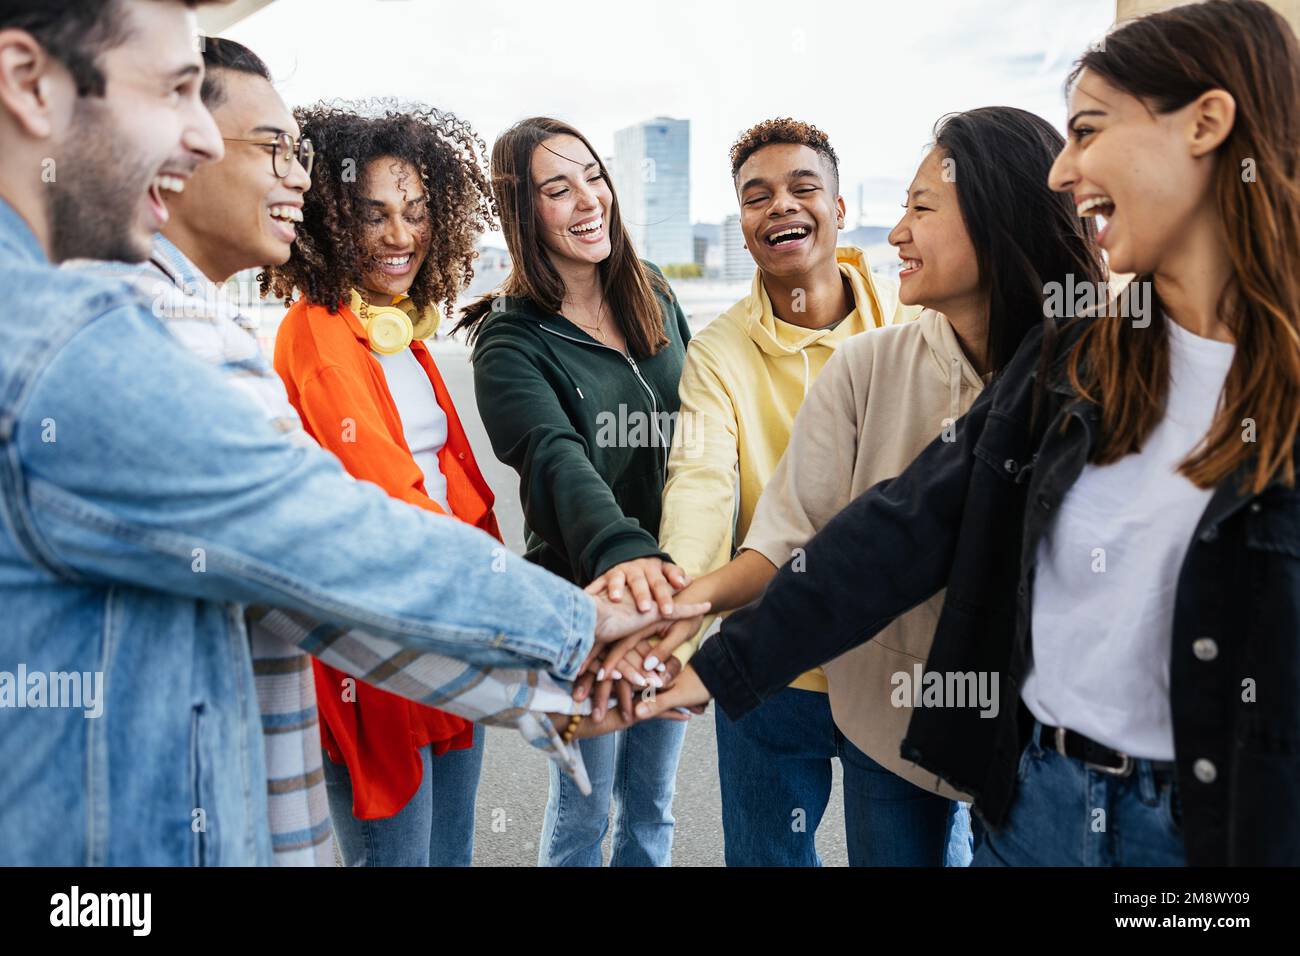 Diverse teenage student friends stacking hands showing teamwork and cooperation Stock Photo